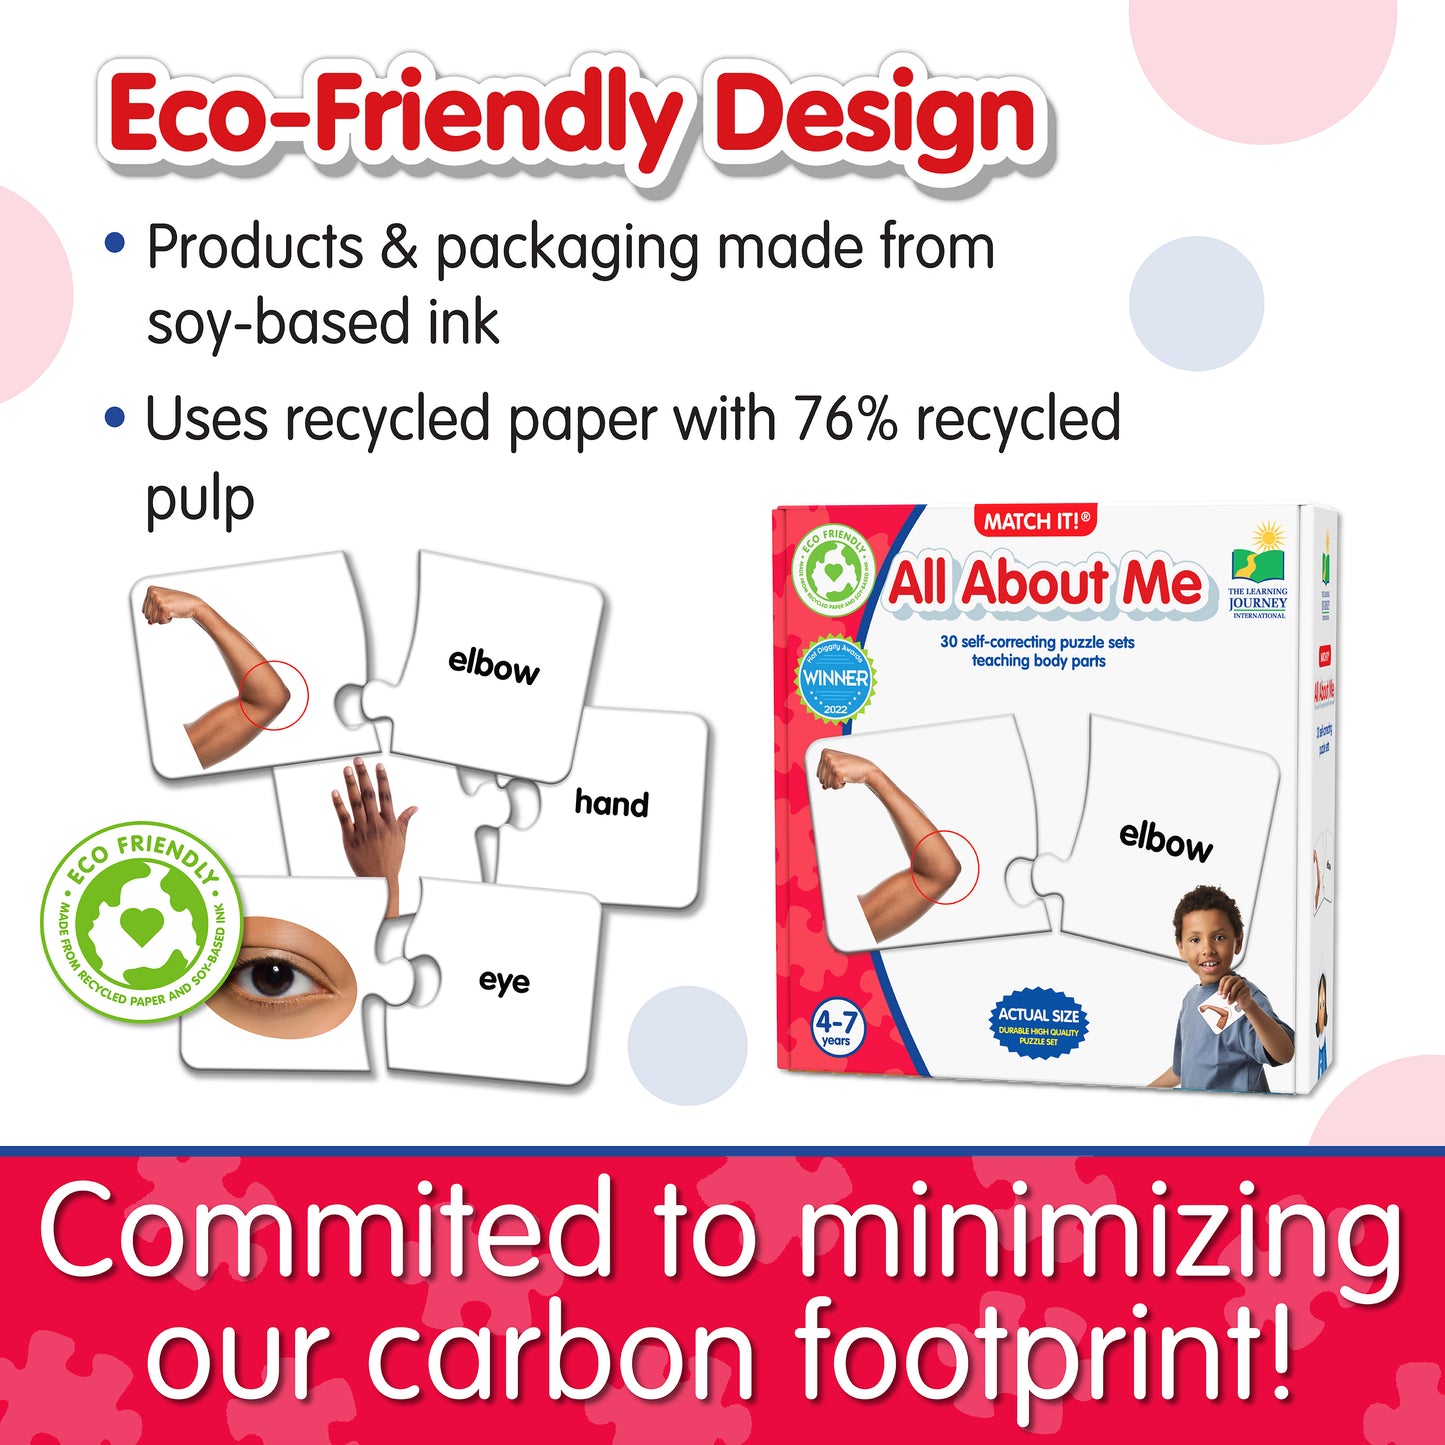 Infographic about Match It - All About Me's eco-friendly design that says, "Committed to minimizing our carbon footprint!"